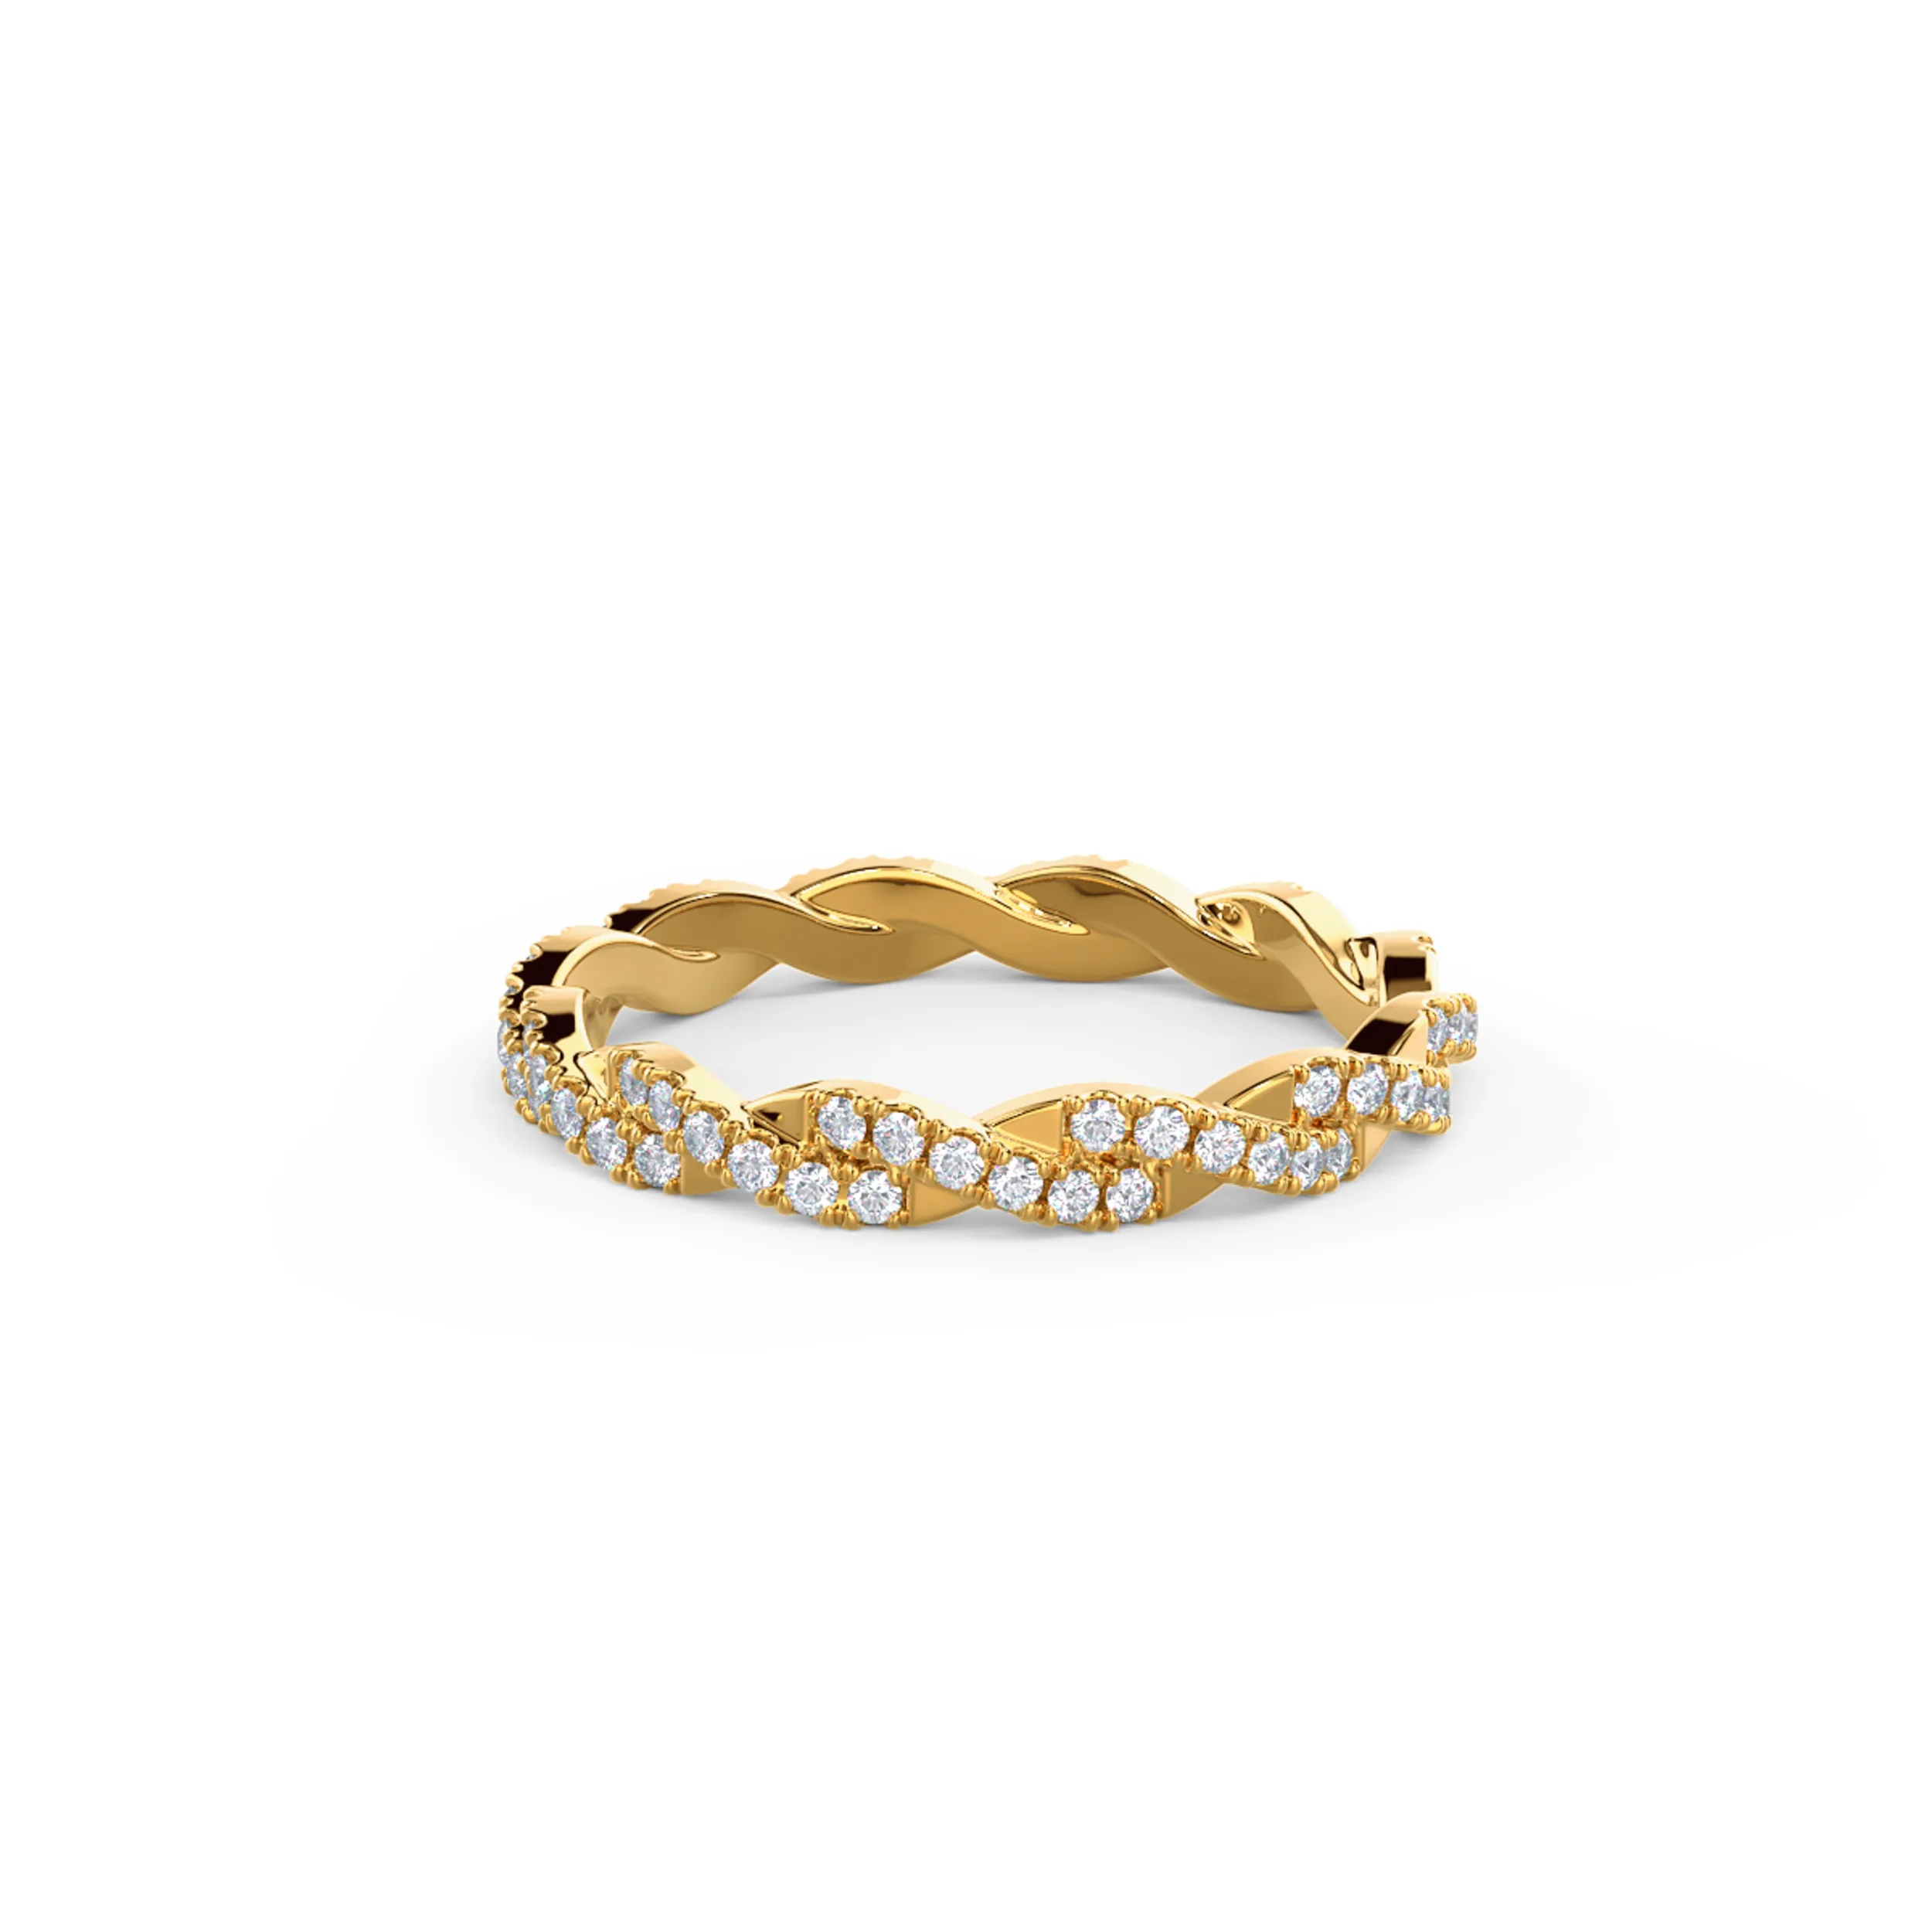 18k Yellow Gold Infinity Twist Full Eternity Band featuring High Quality 0.45 Carat Round Brilliant Diamonds (Main View)